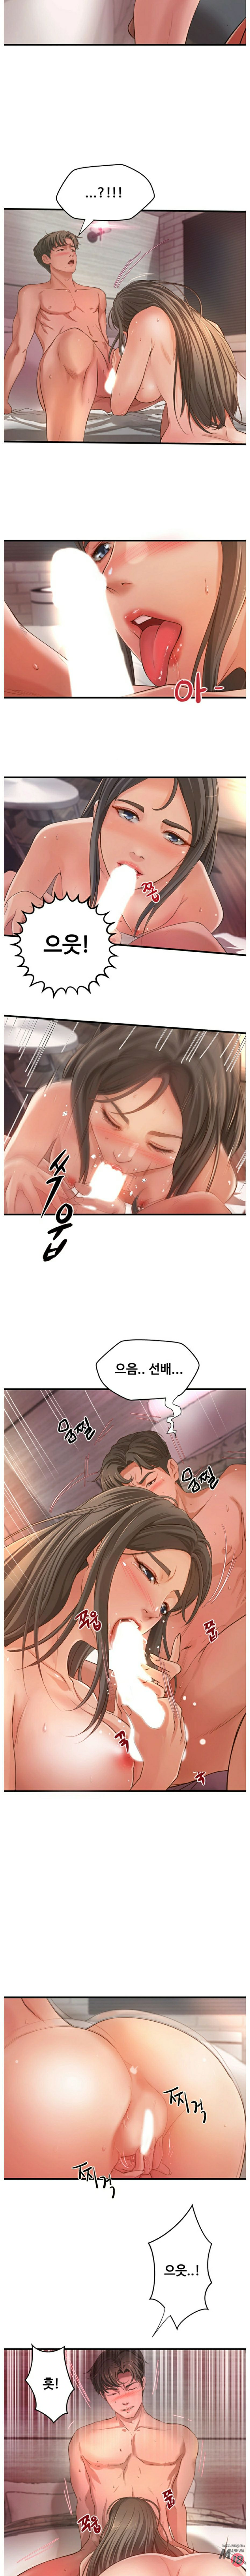 Sister’s Sex Education Raw - Chapter 1 Page 9